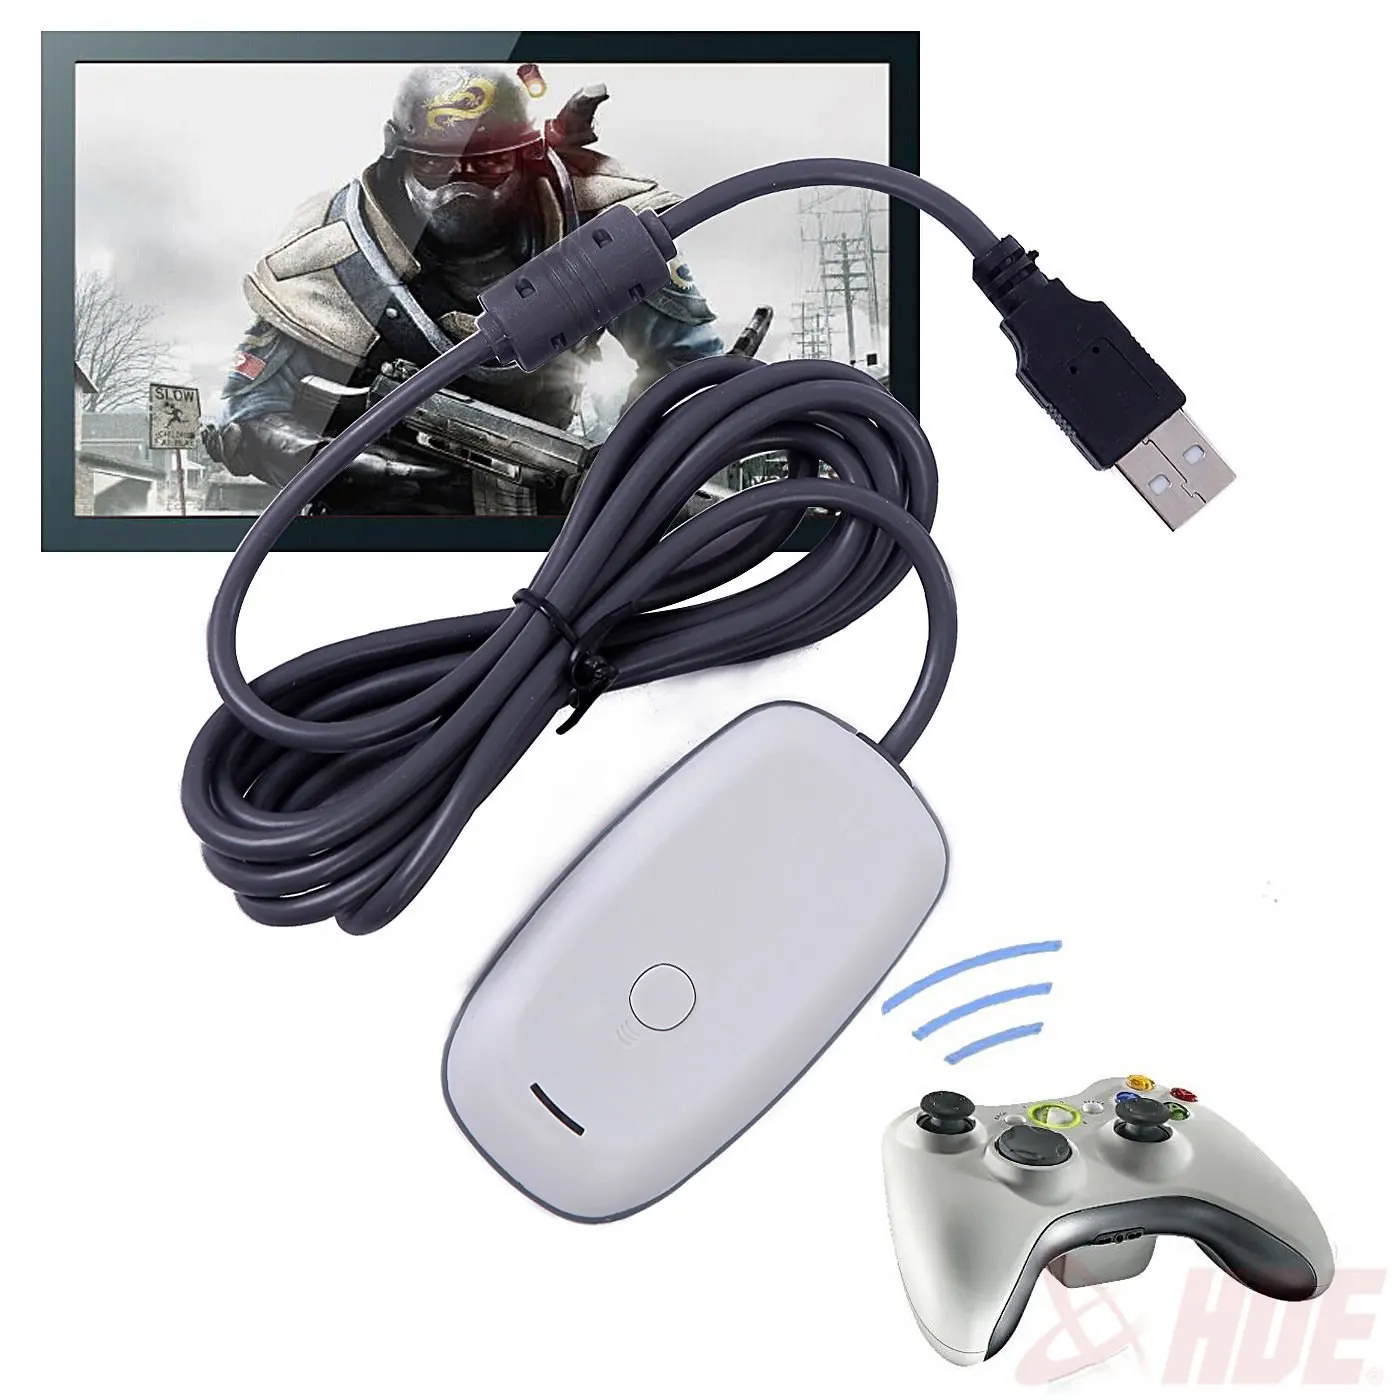 generic wireless pc usb gaming receiver for xbox 360